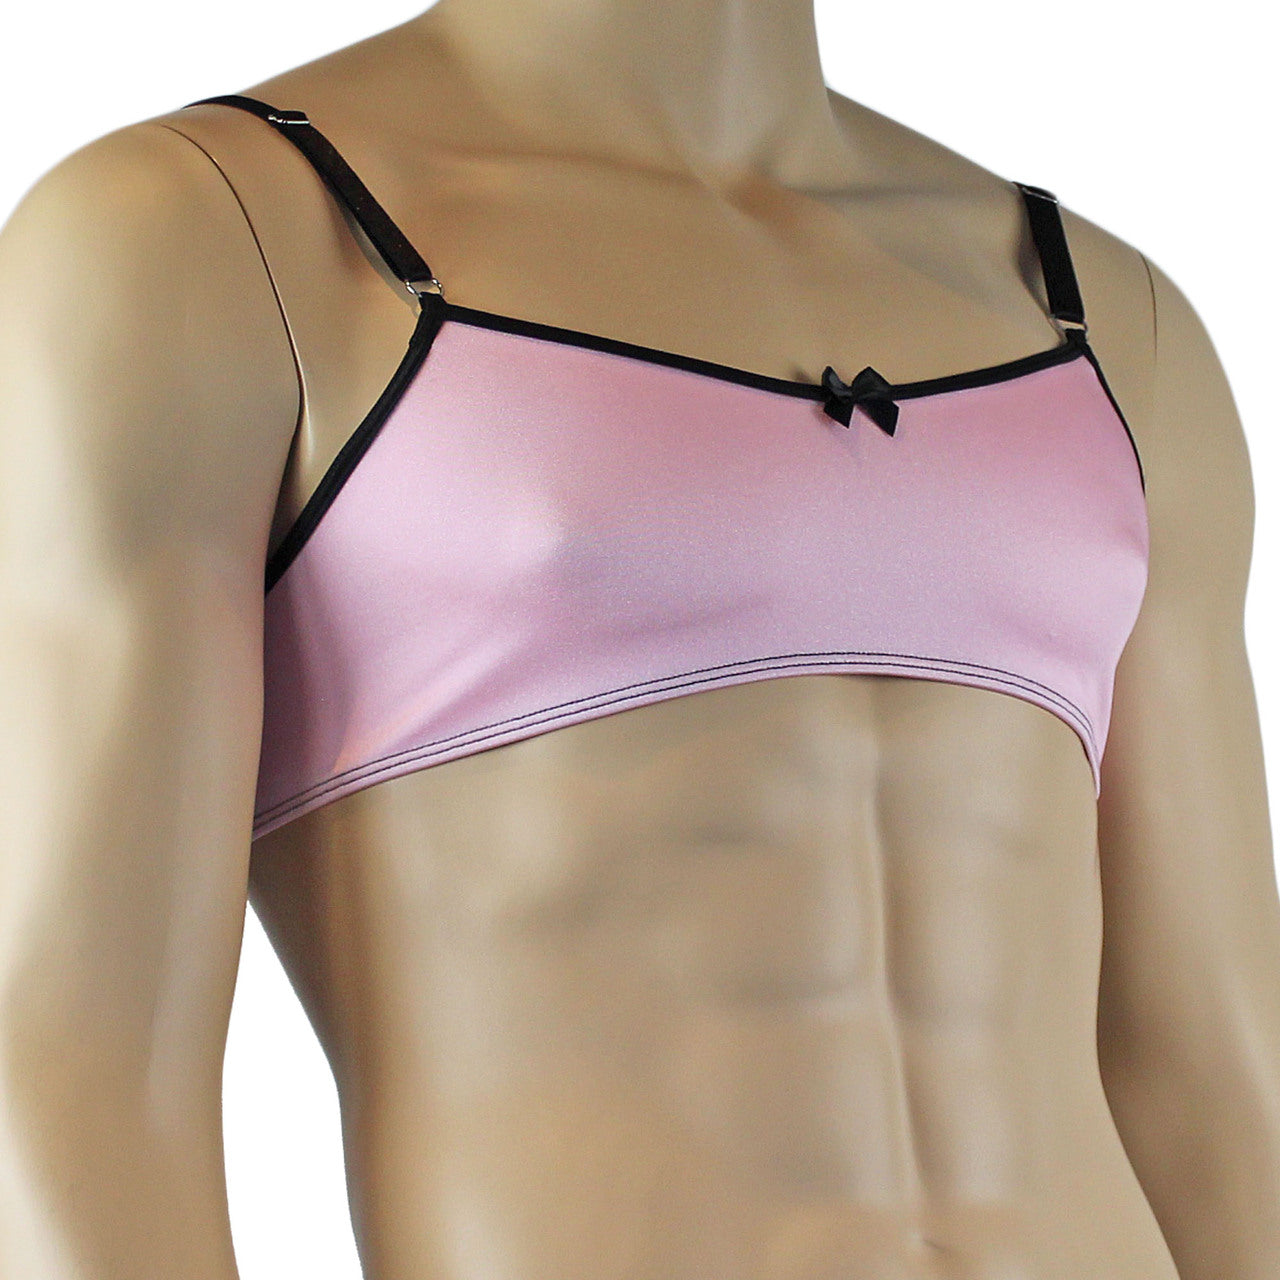 Mens Twinkle Lingerie Spandex Bra with Bow, Light Pink & Black